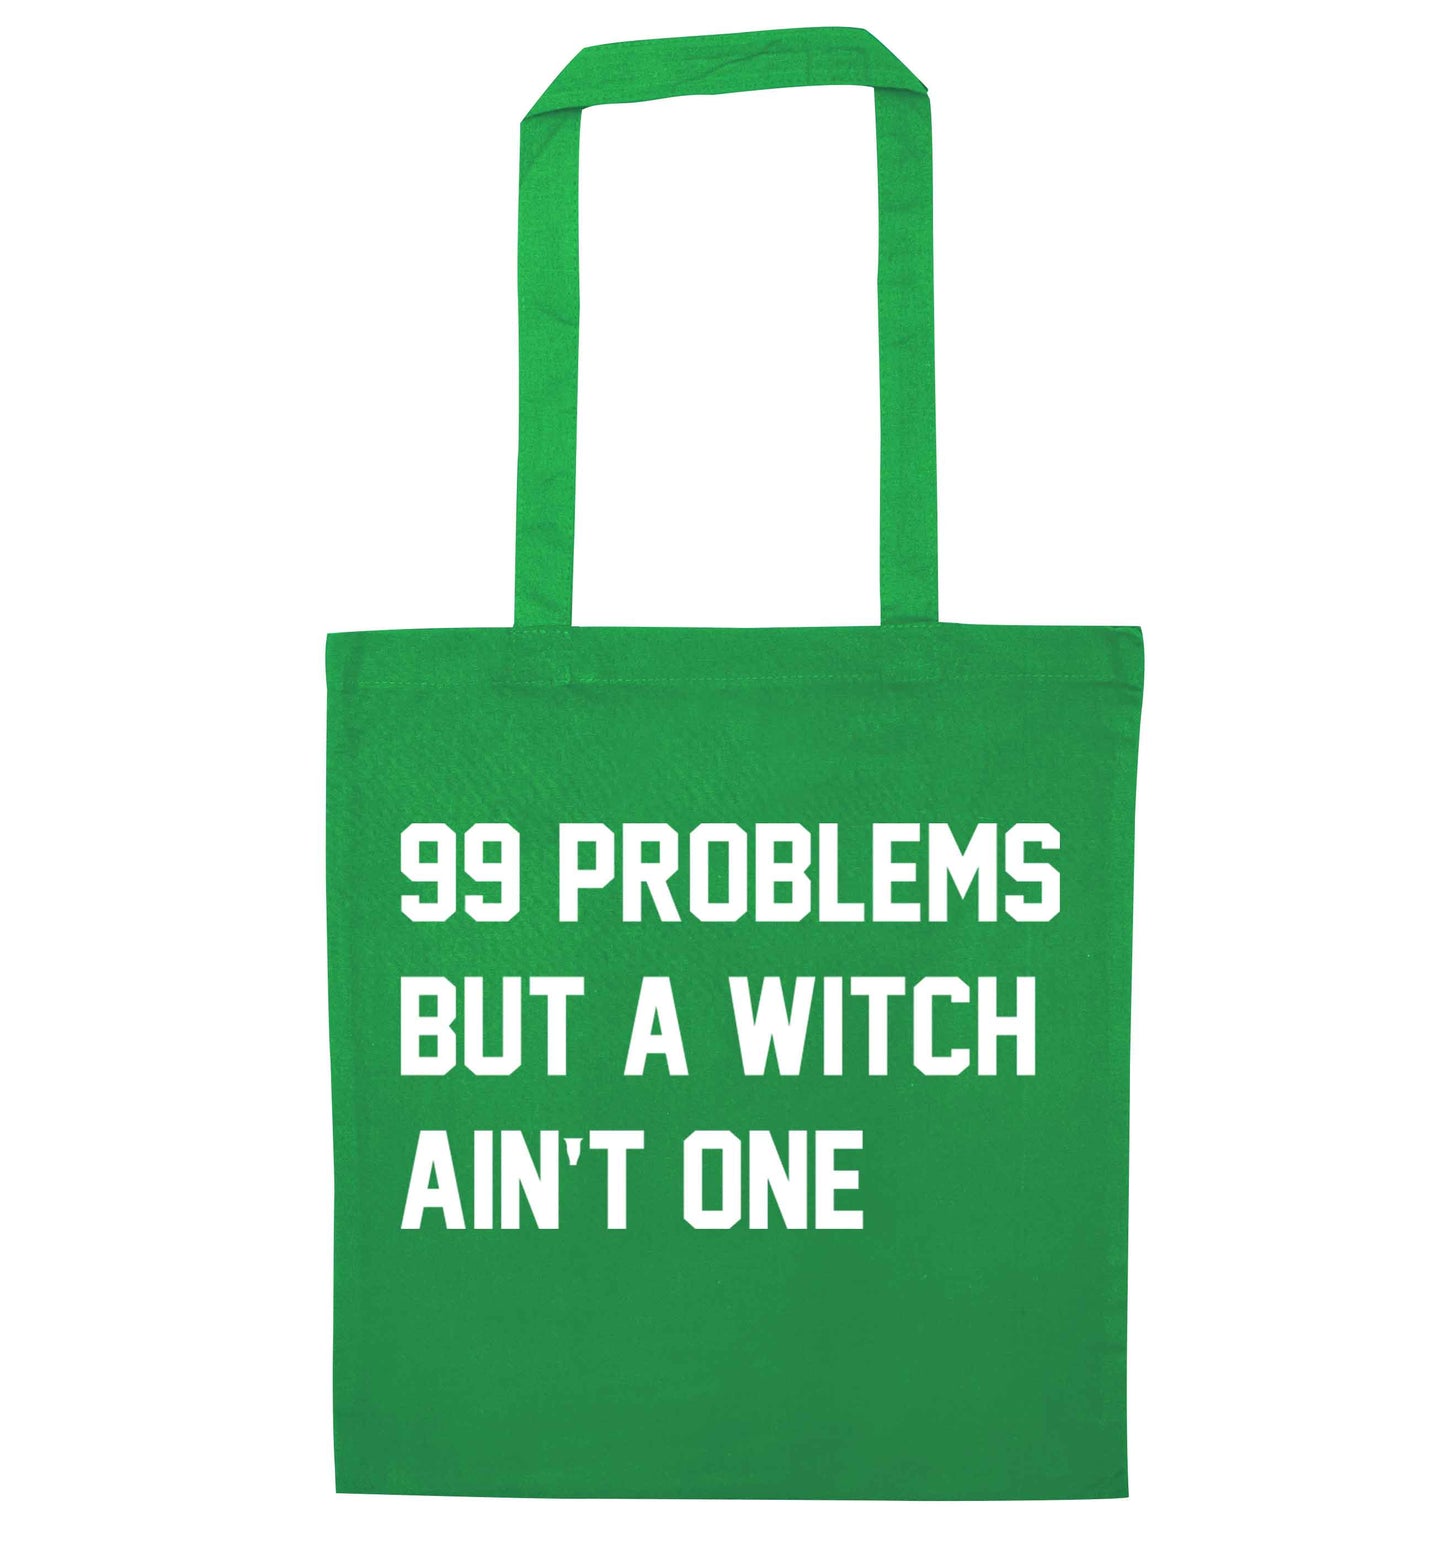 99 Problems but a witch aint one green tote bag